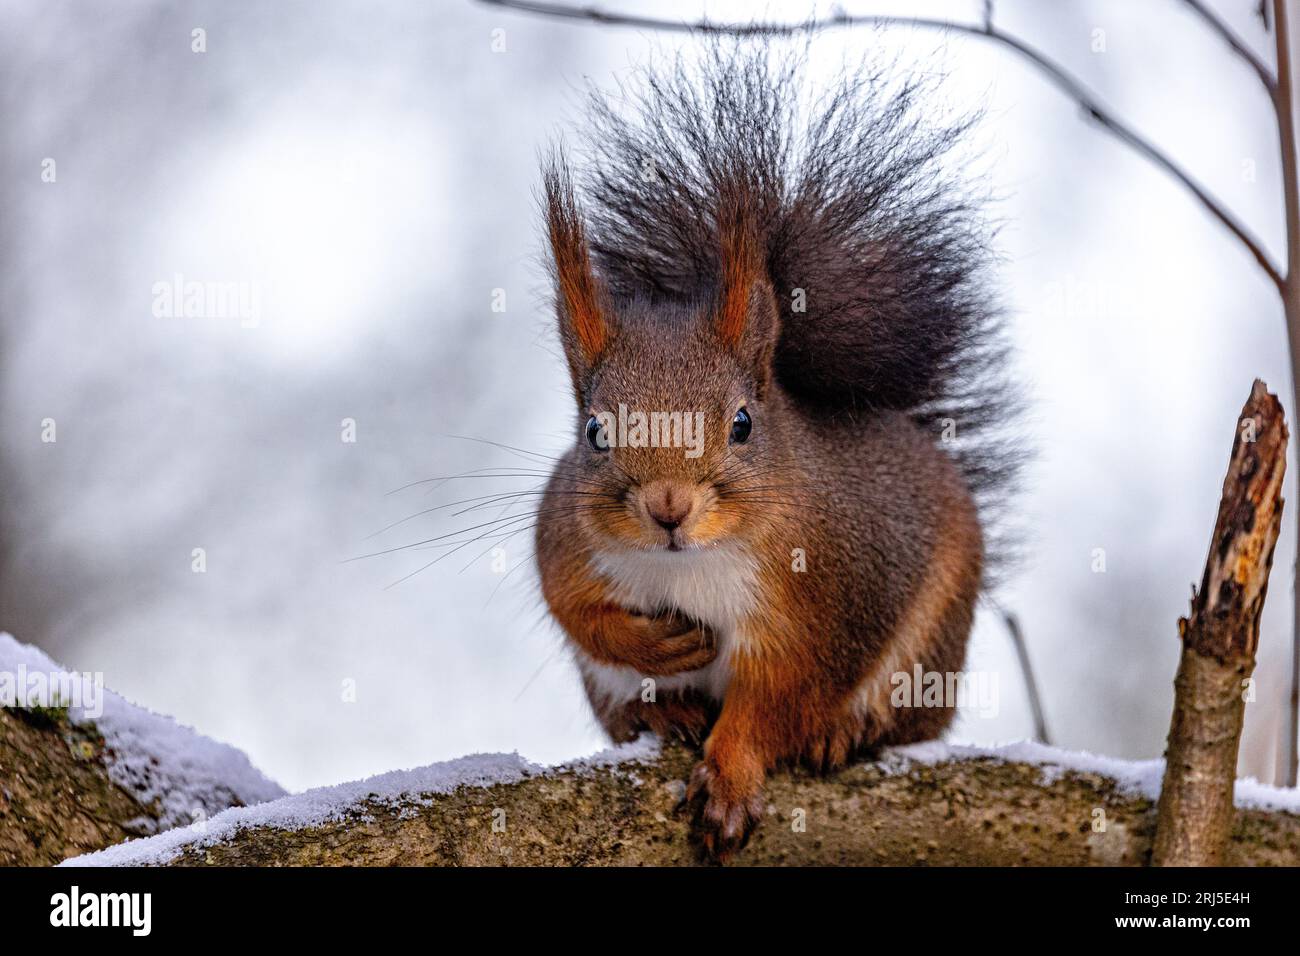 A cute red squirrel perched atop a snow-covered tree branch in a wintry landscape Stock Photo